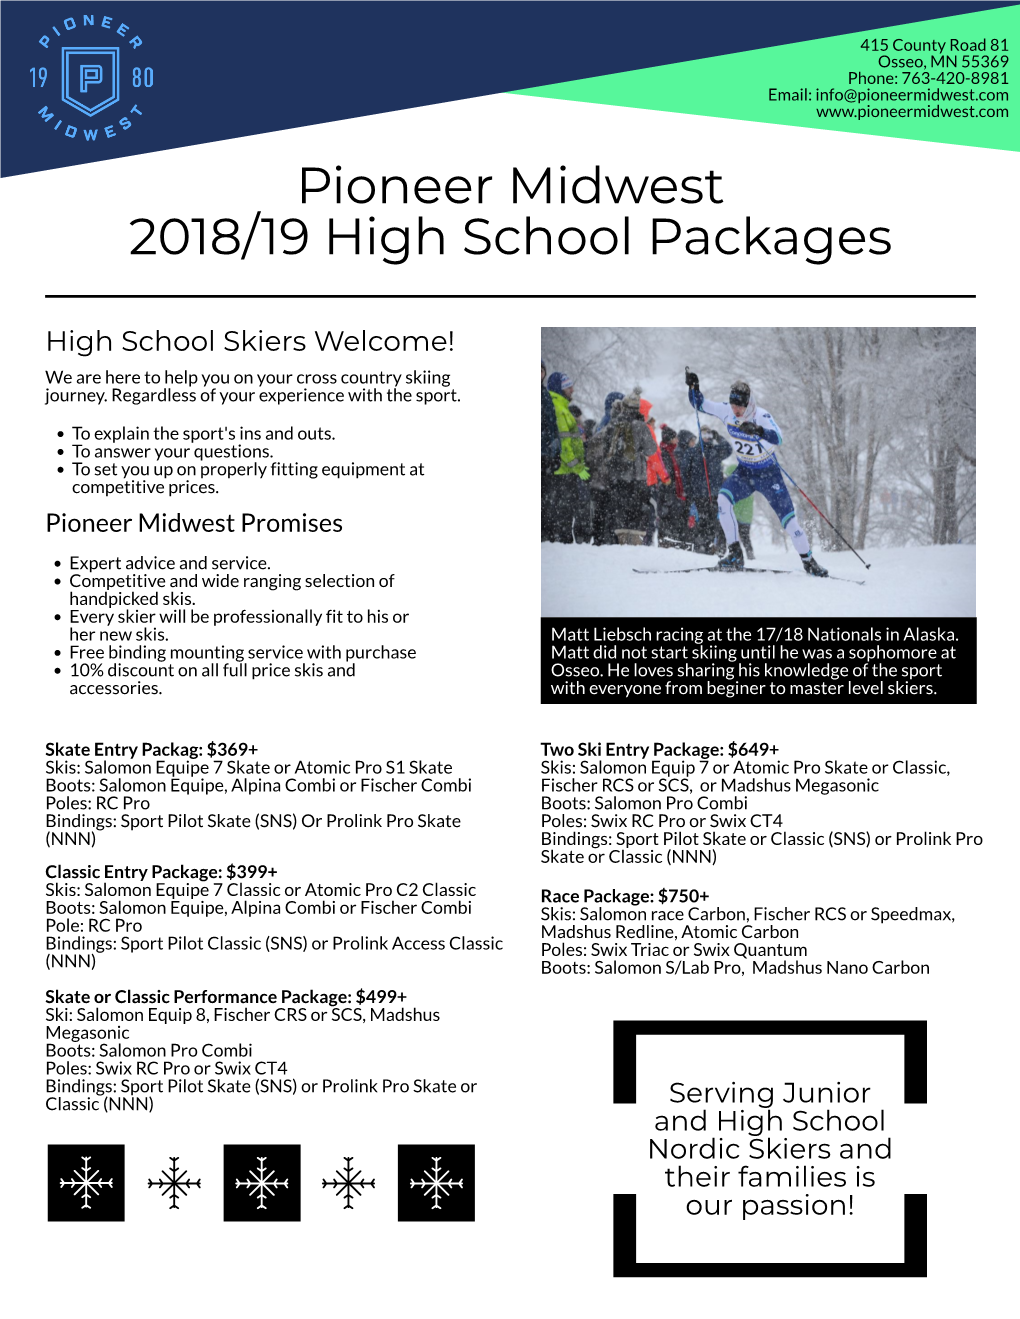 Serving Junior and High School Nordic Skiers and Their Families Is Our Passion!